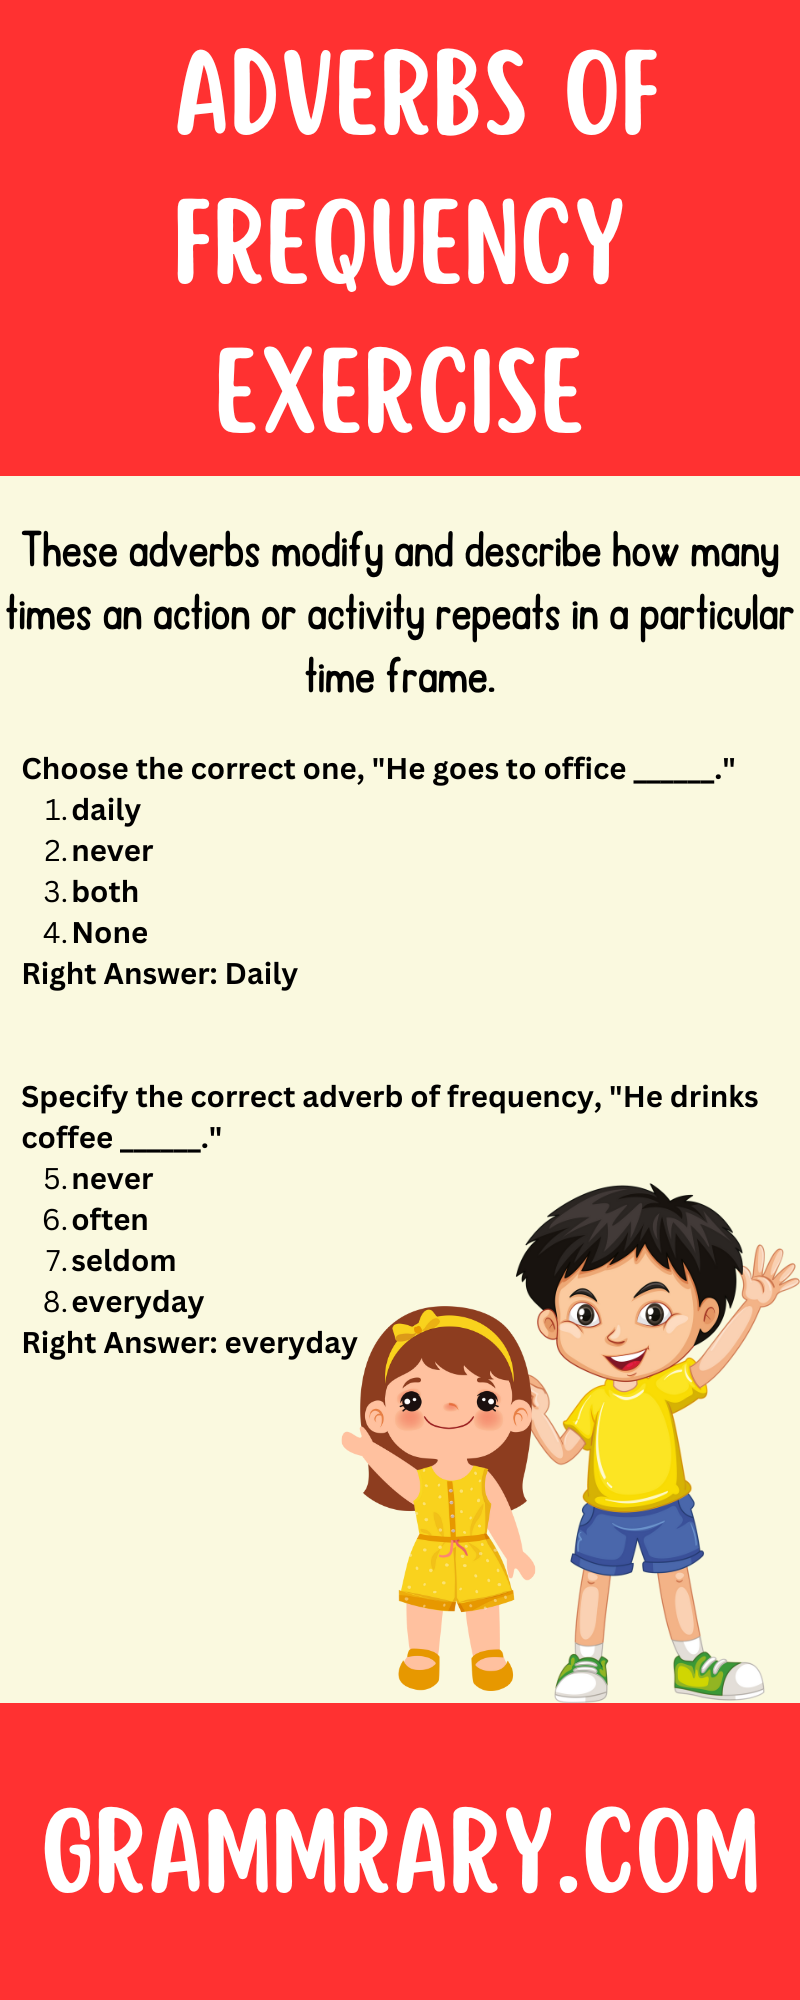 Adverb of frequency exercises 